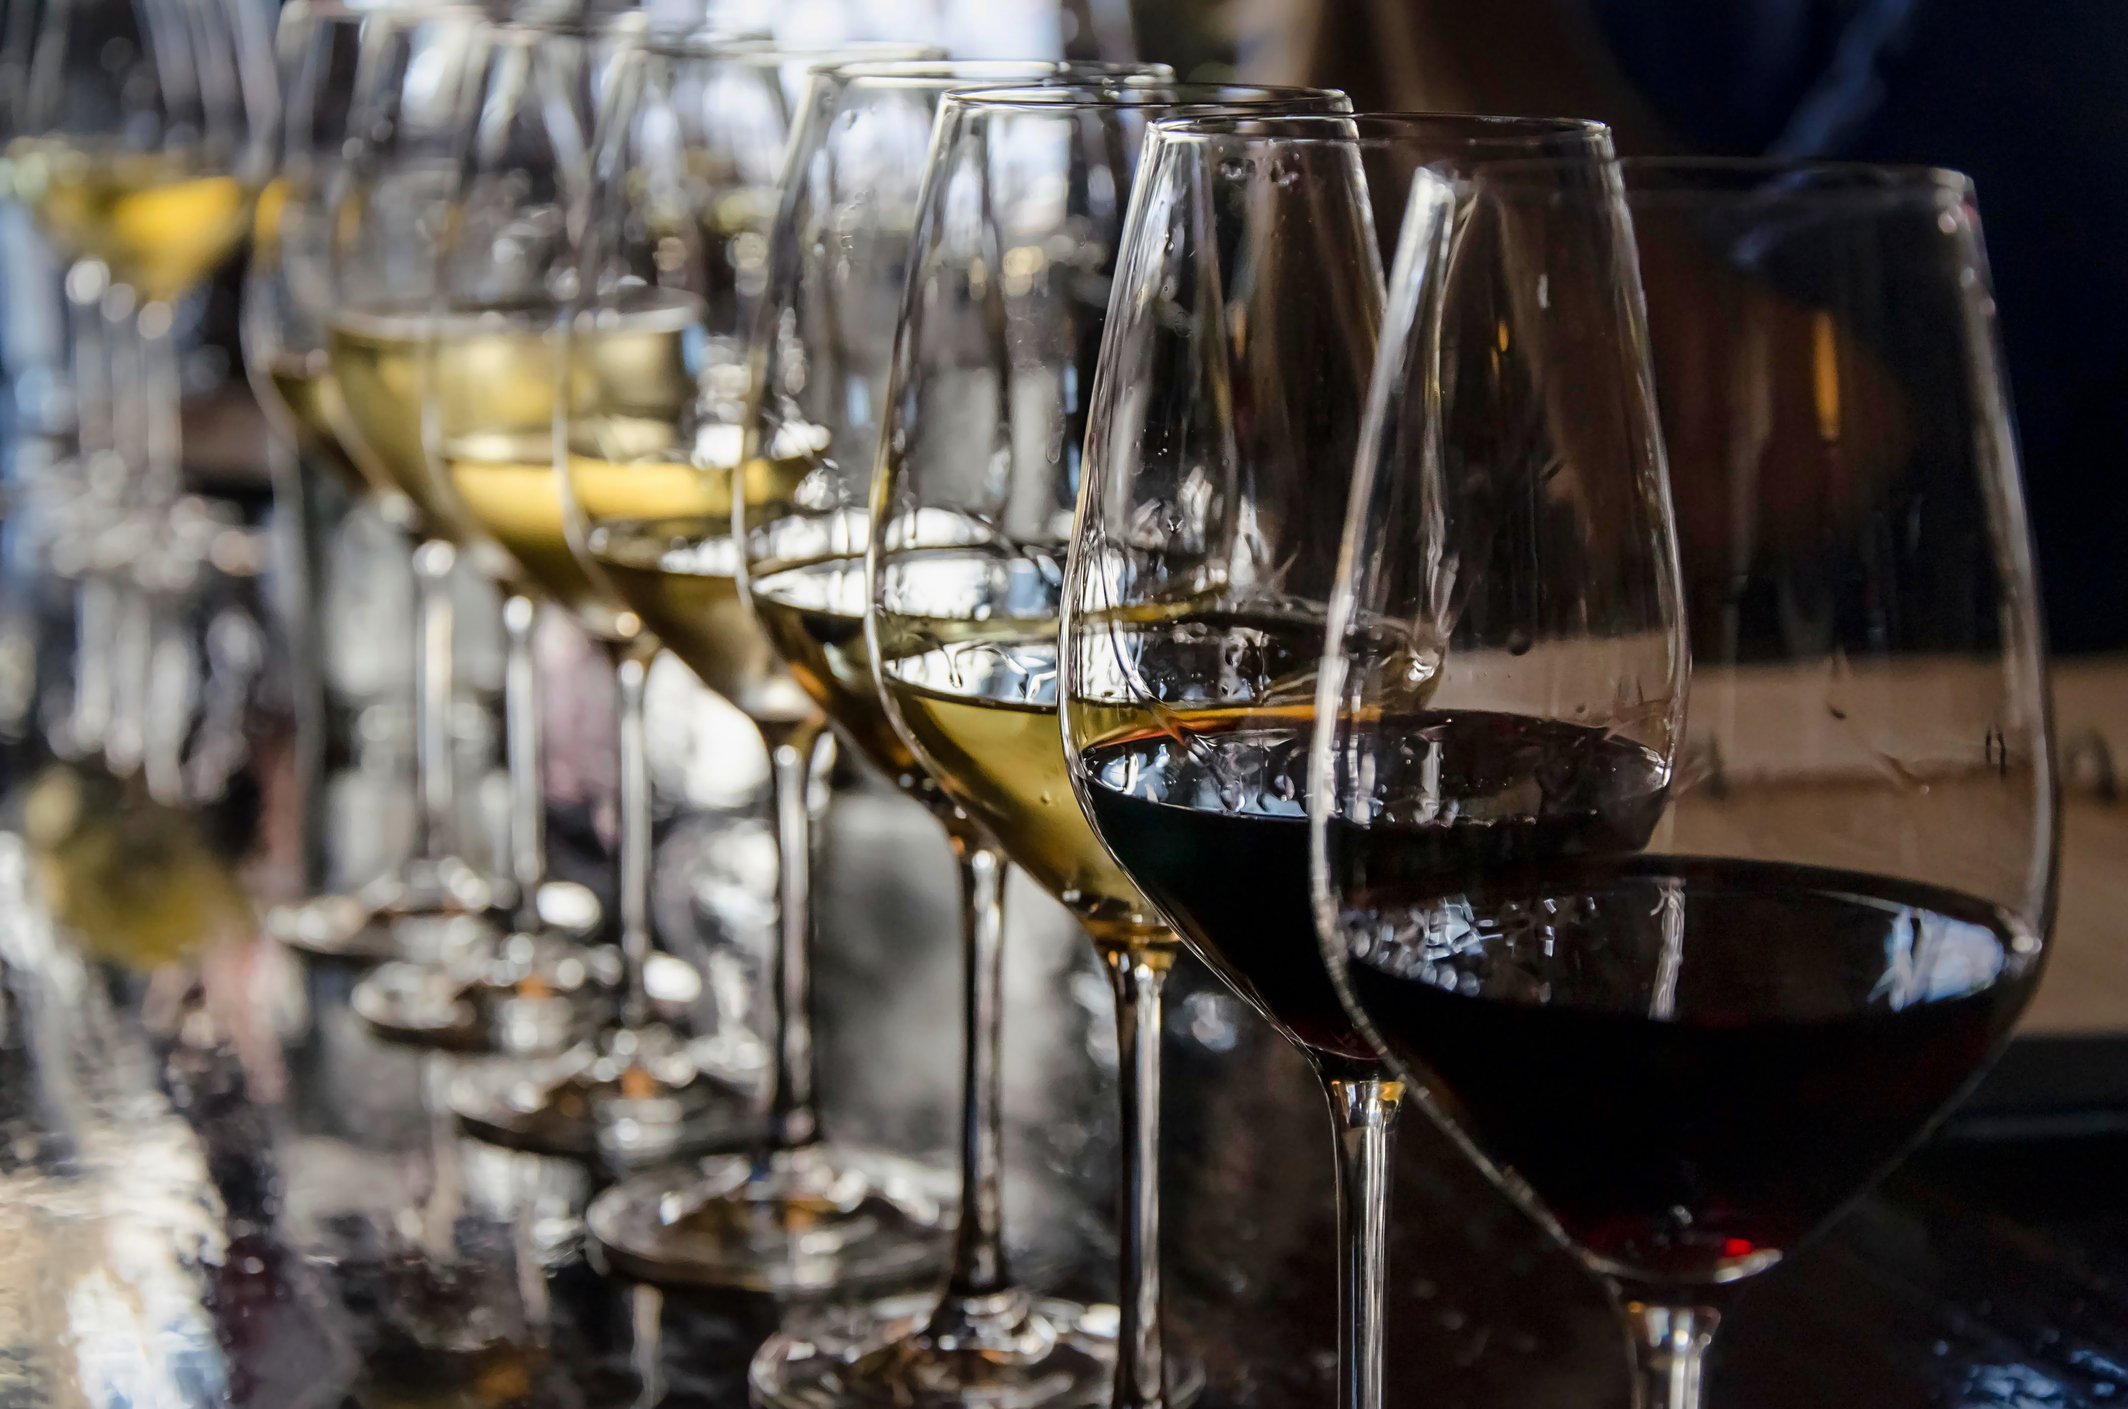 Best wine tasting classes in Singapore will teach you all about wines